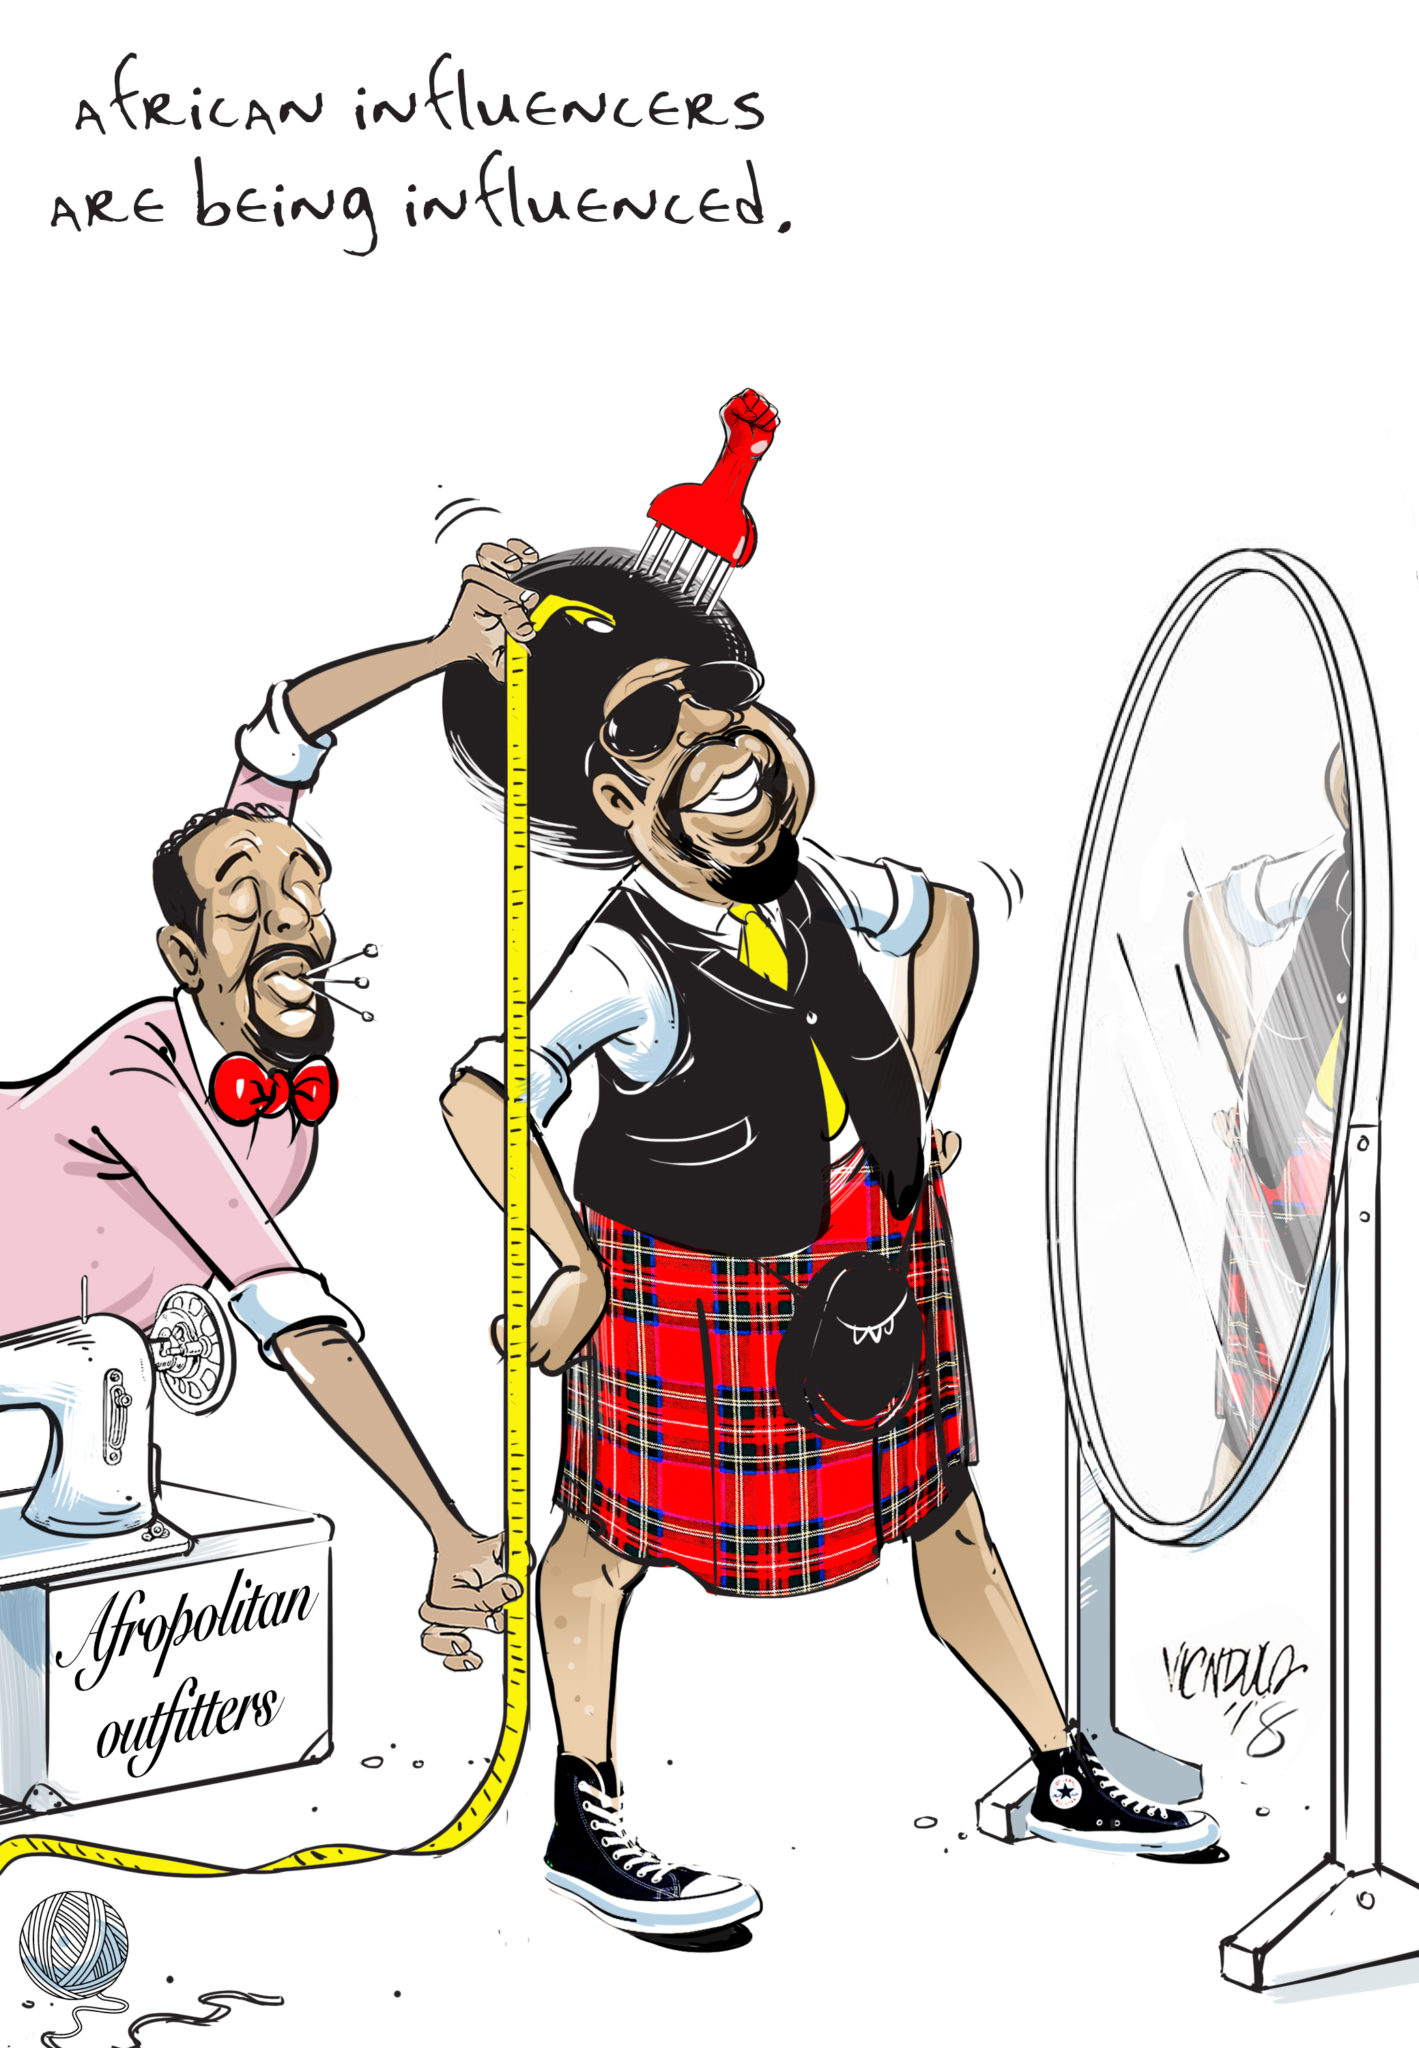 What are cartoons meant to do? - Good Governance Africa